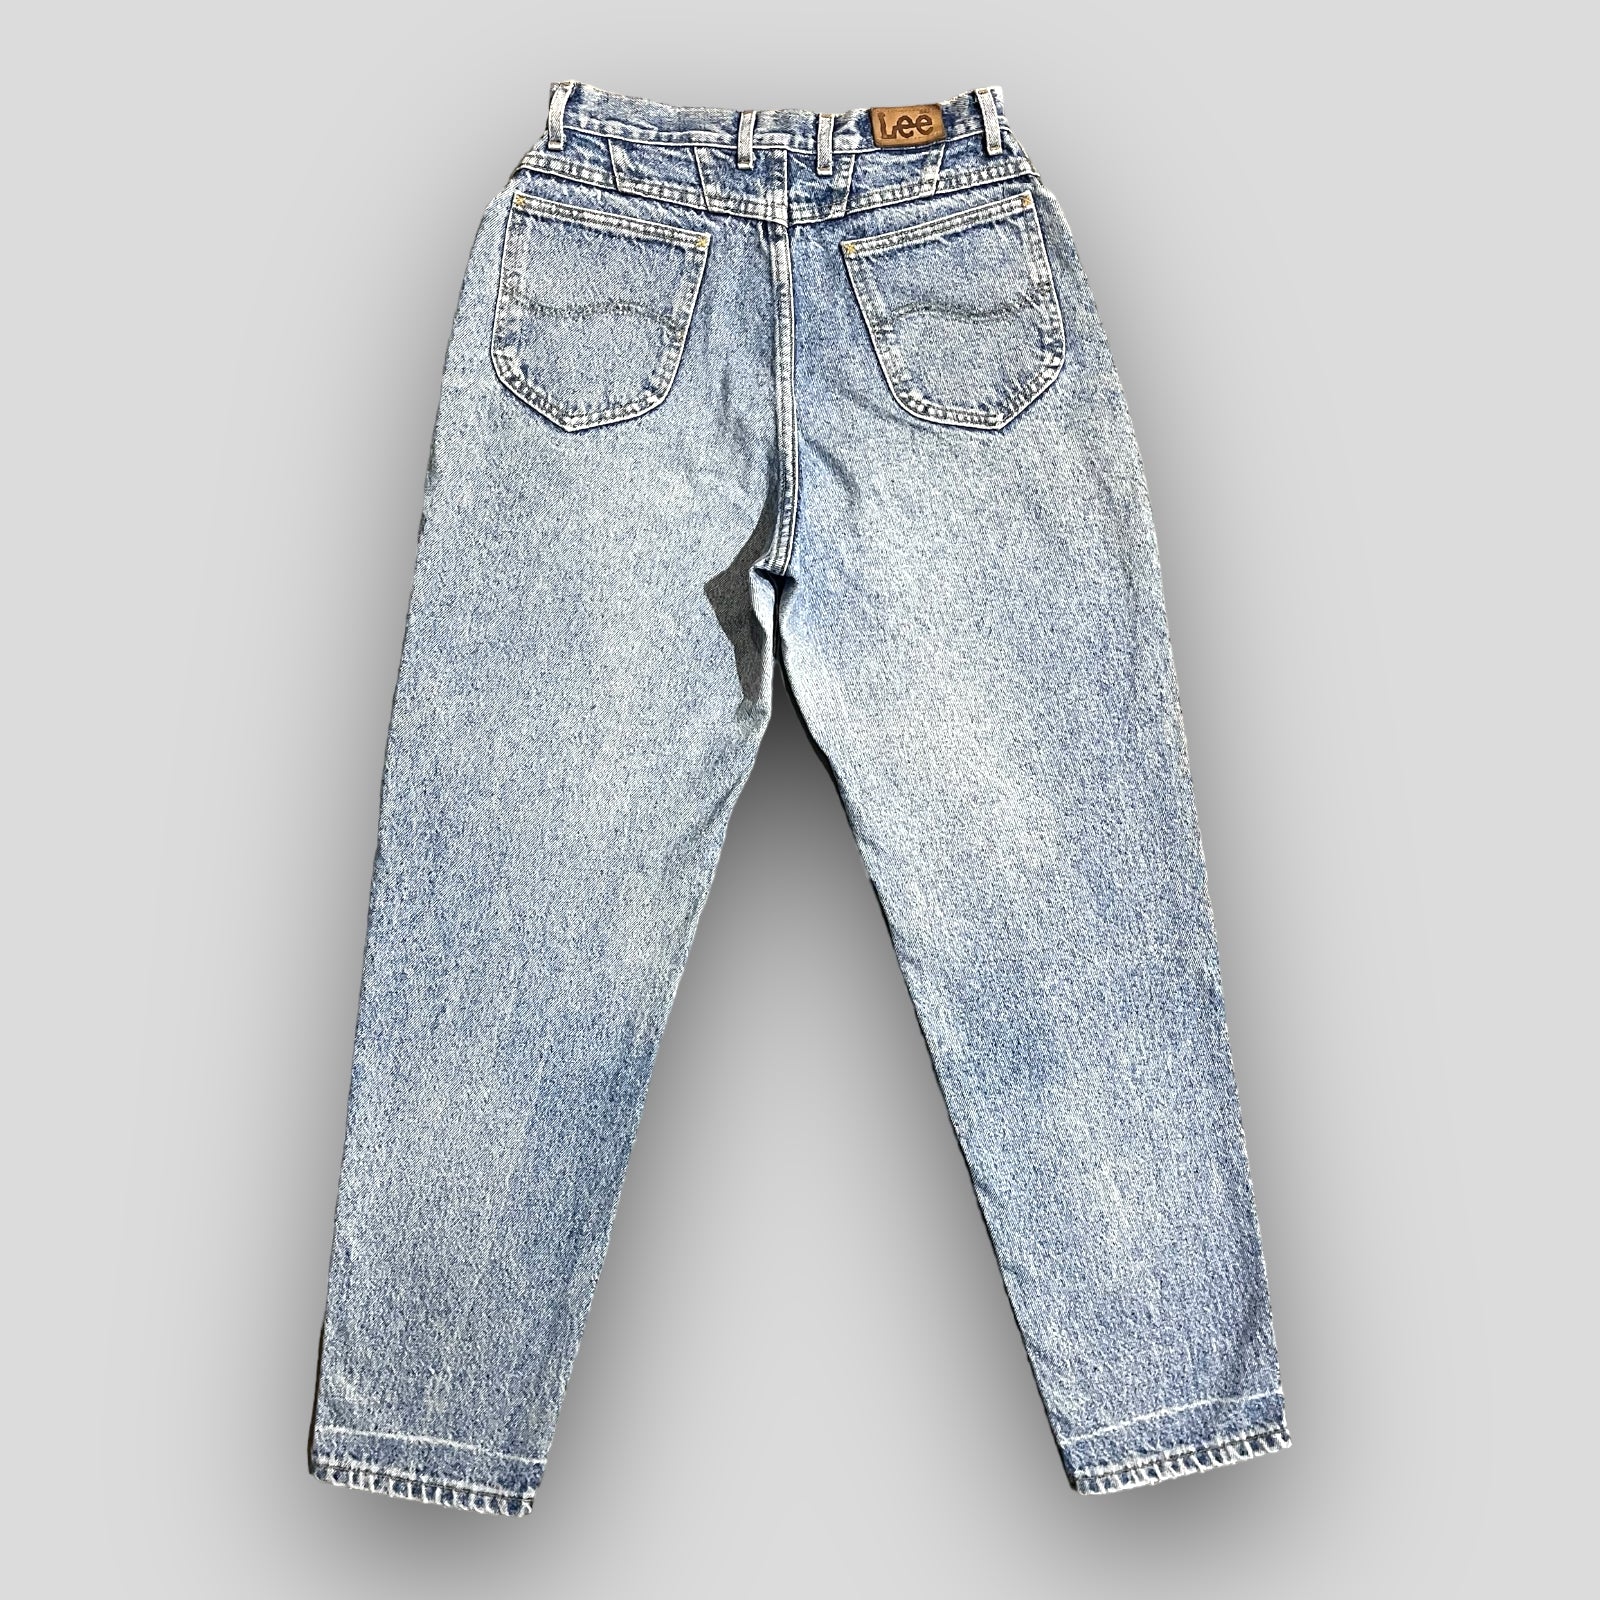 Mens Straight Leg Stonewash Relaxed Fit Jeans by Armani